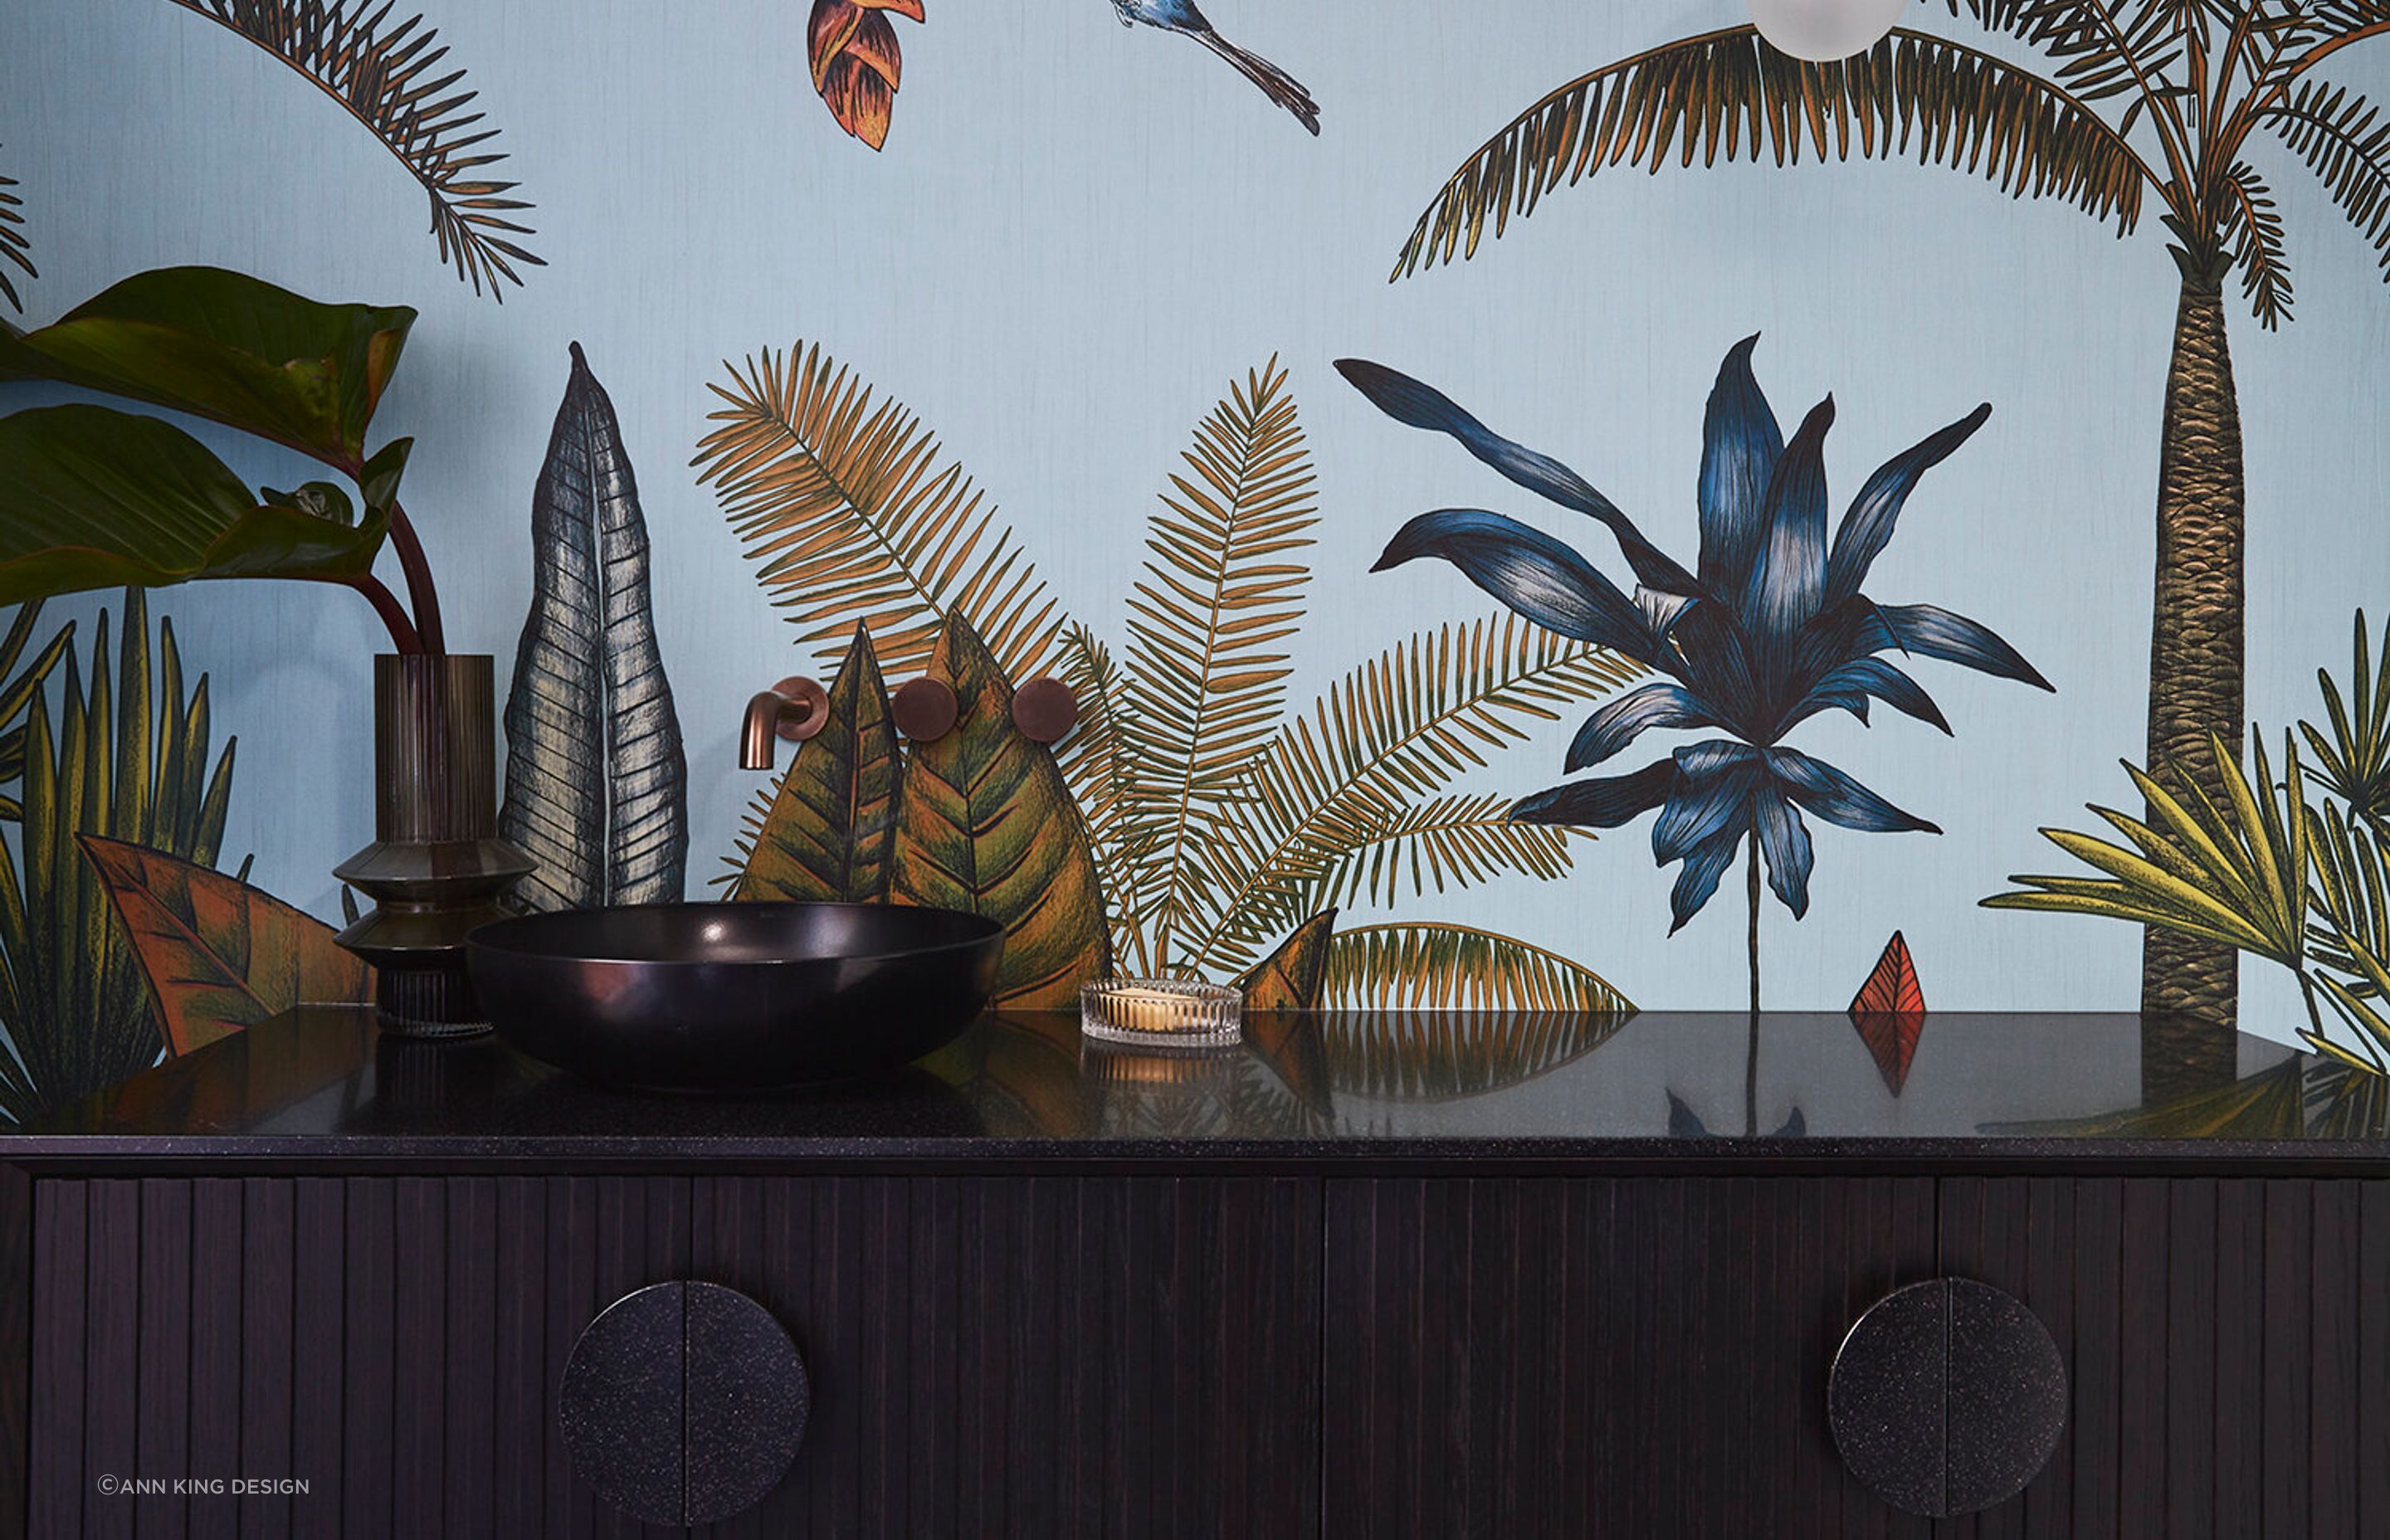 An exquisite use of tropical wallpaper in this Balmoral Bathrooms project.